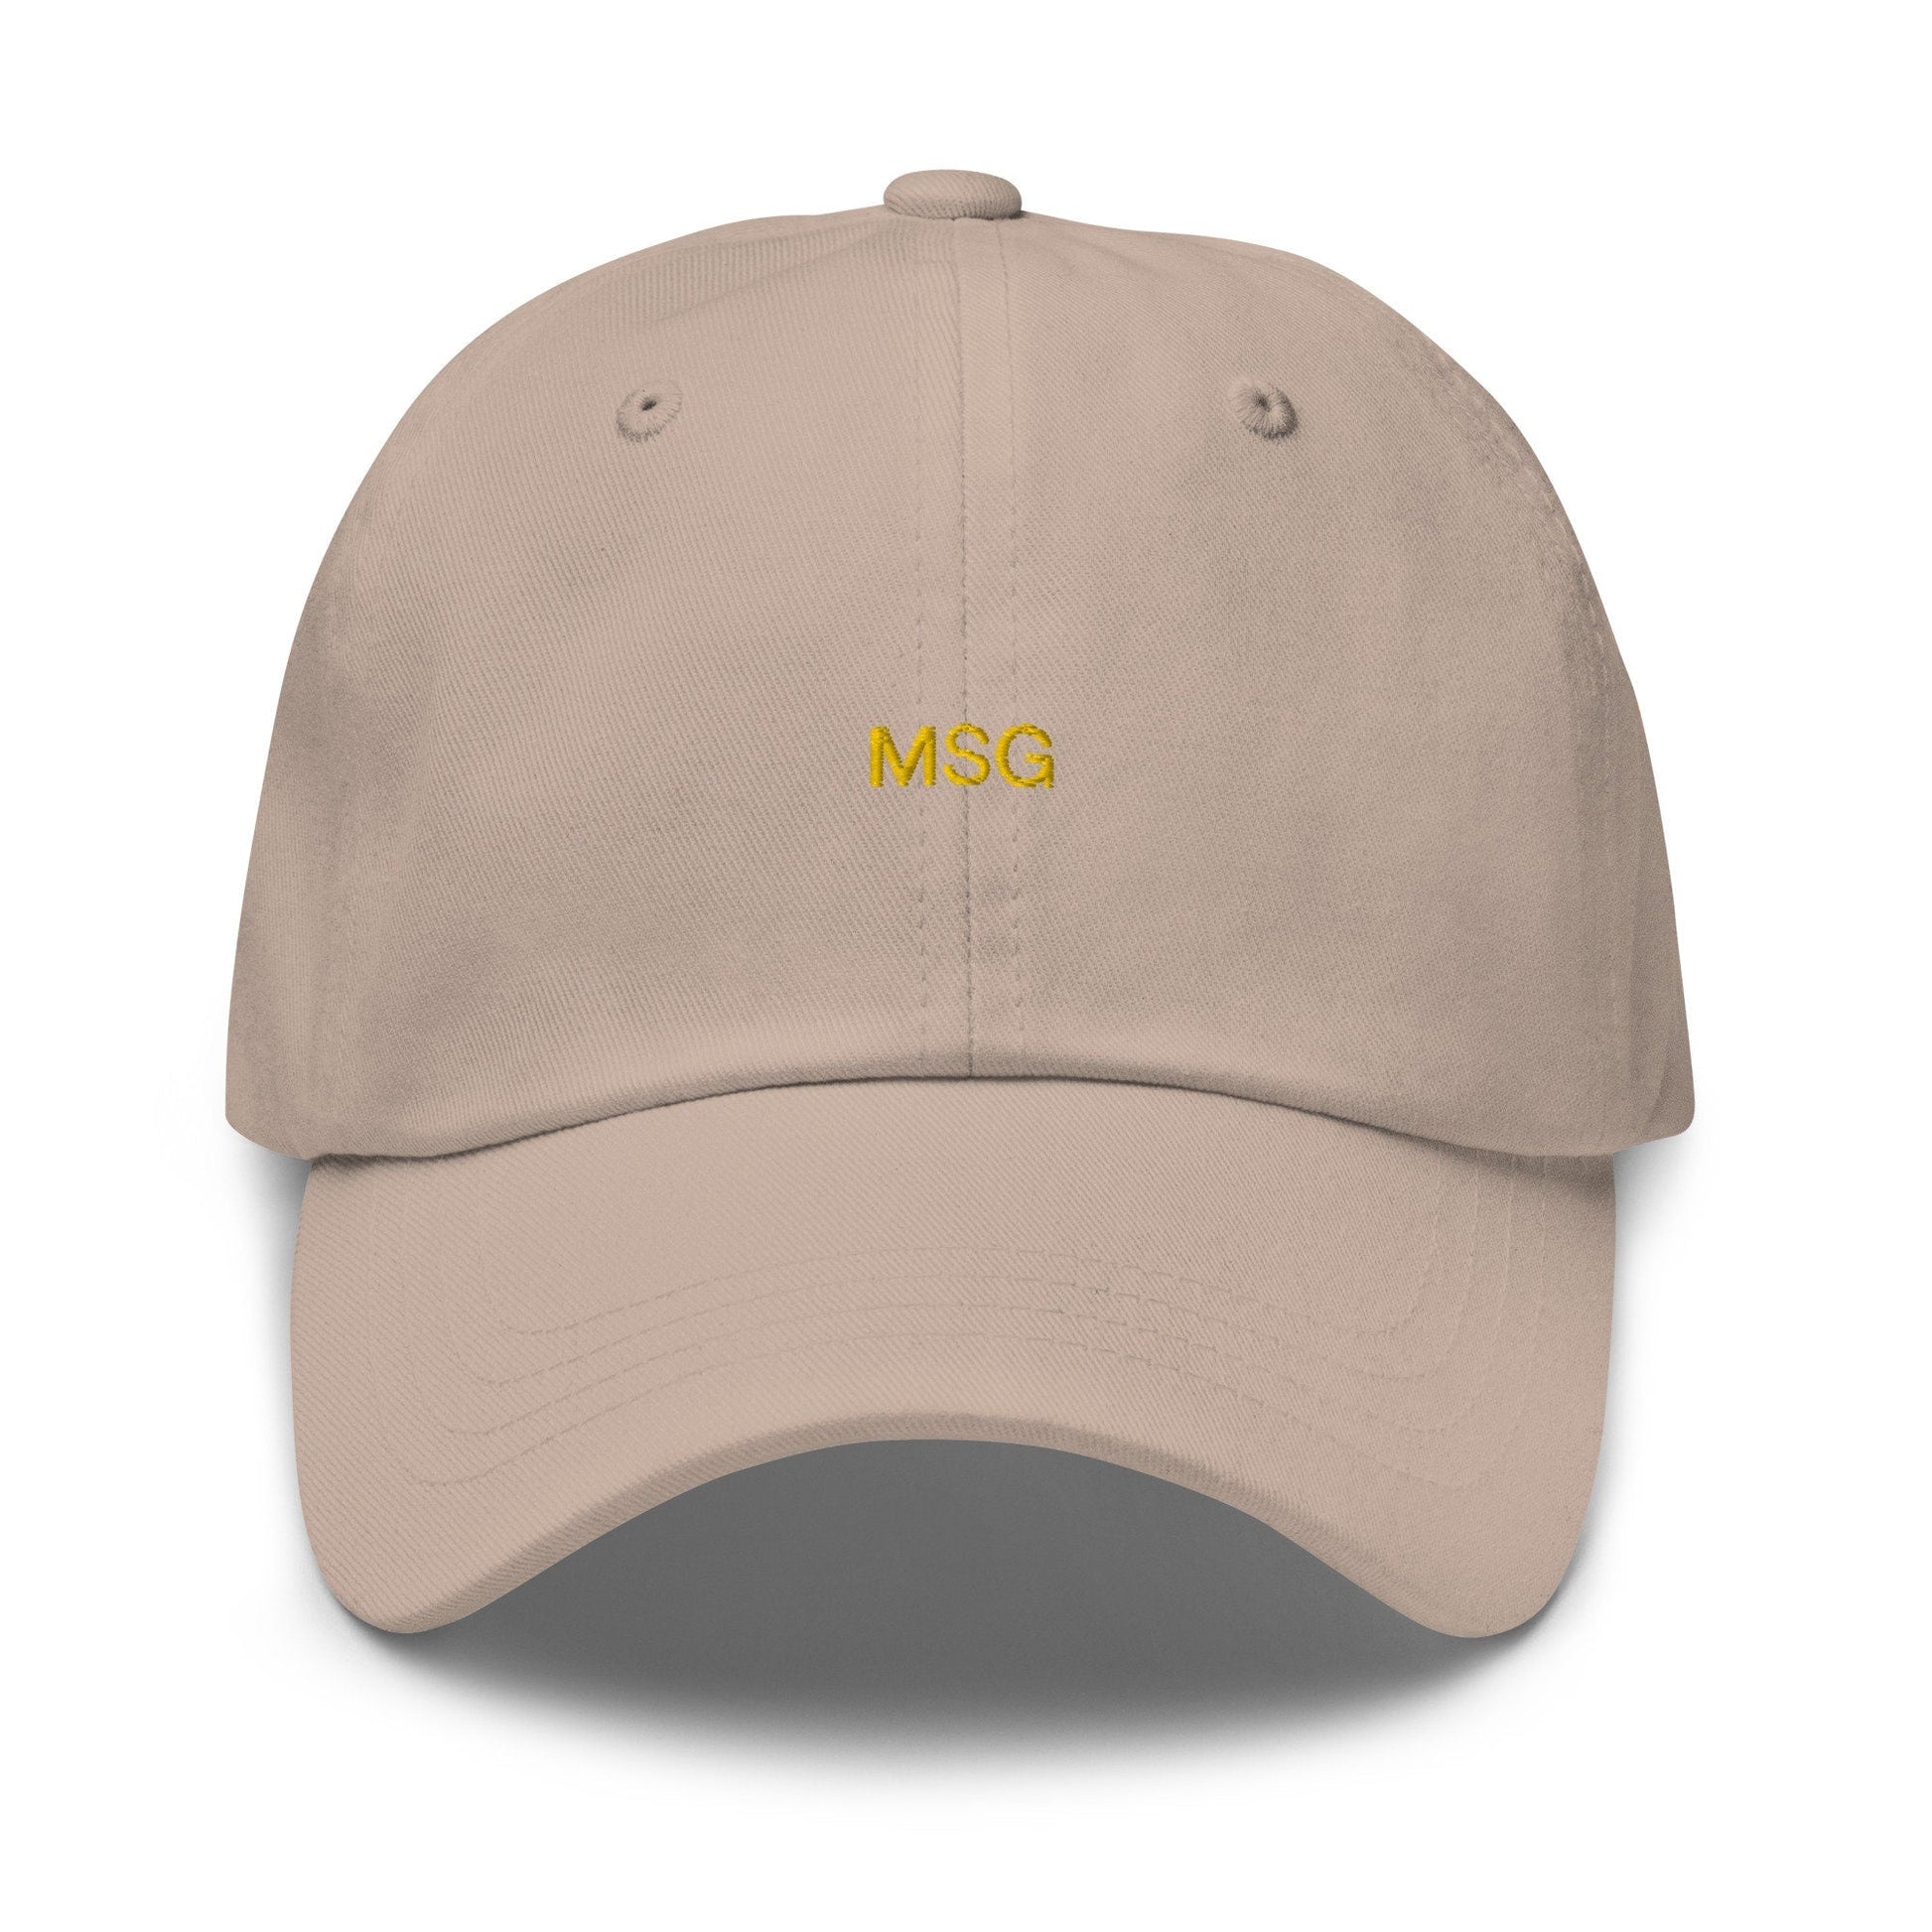 MSG Dad Hat - Gift for Asian Food Lovers - Cotton Embroidered Baseball Cap - Multiple Colors